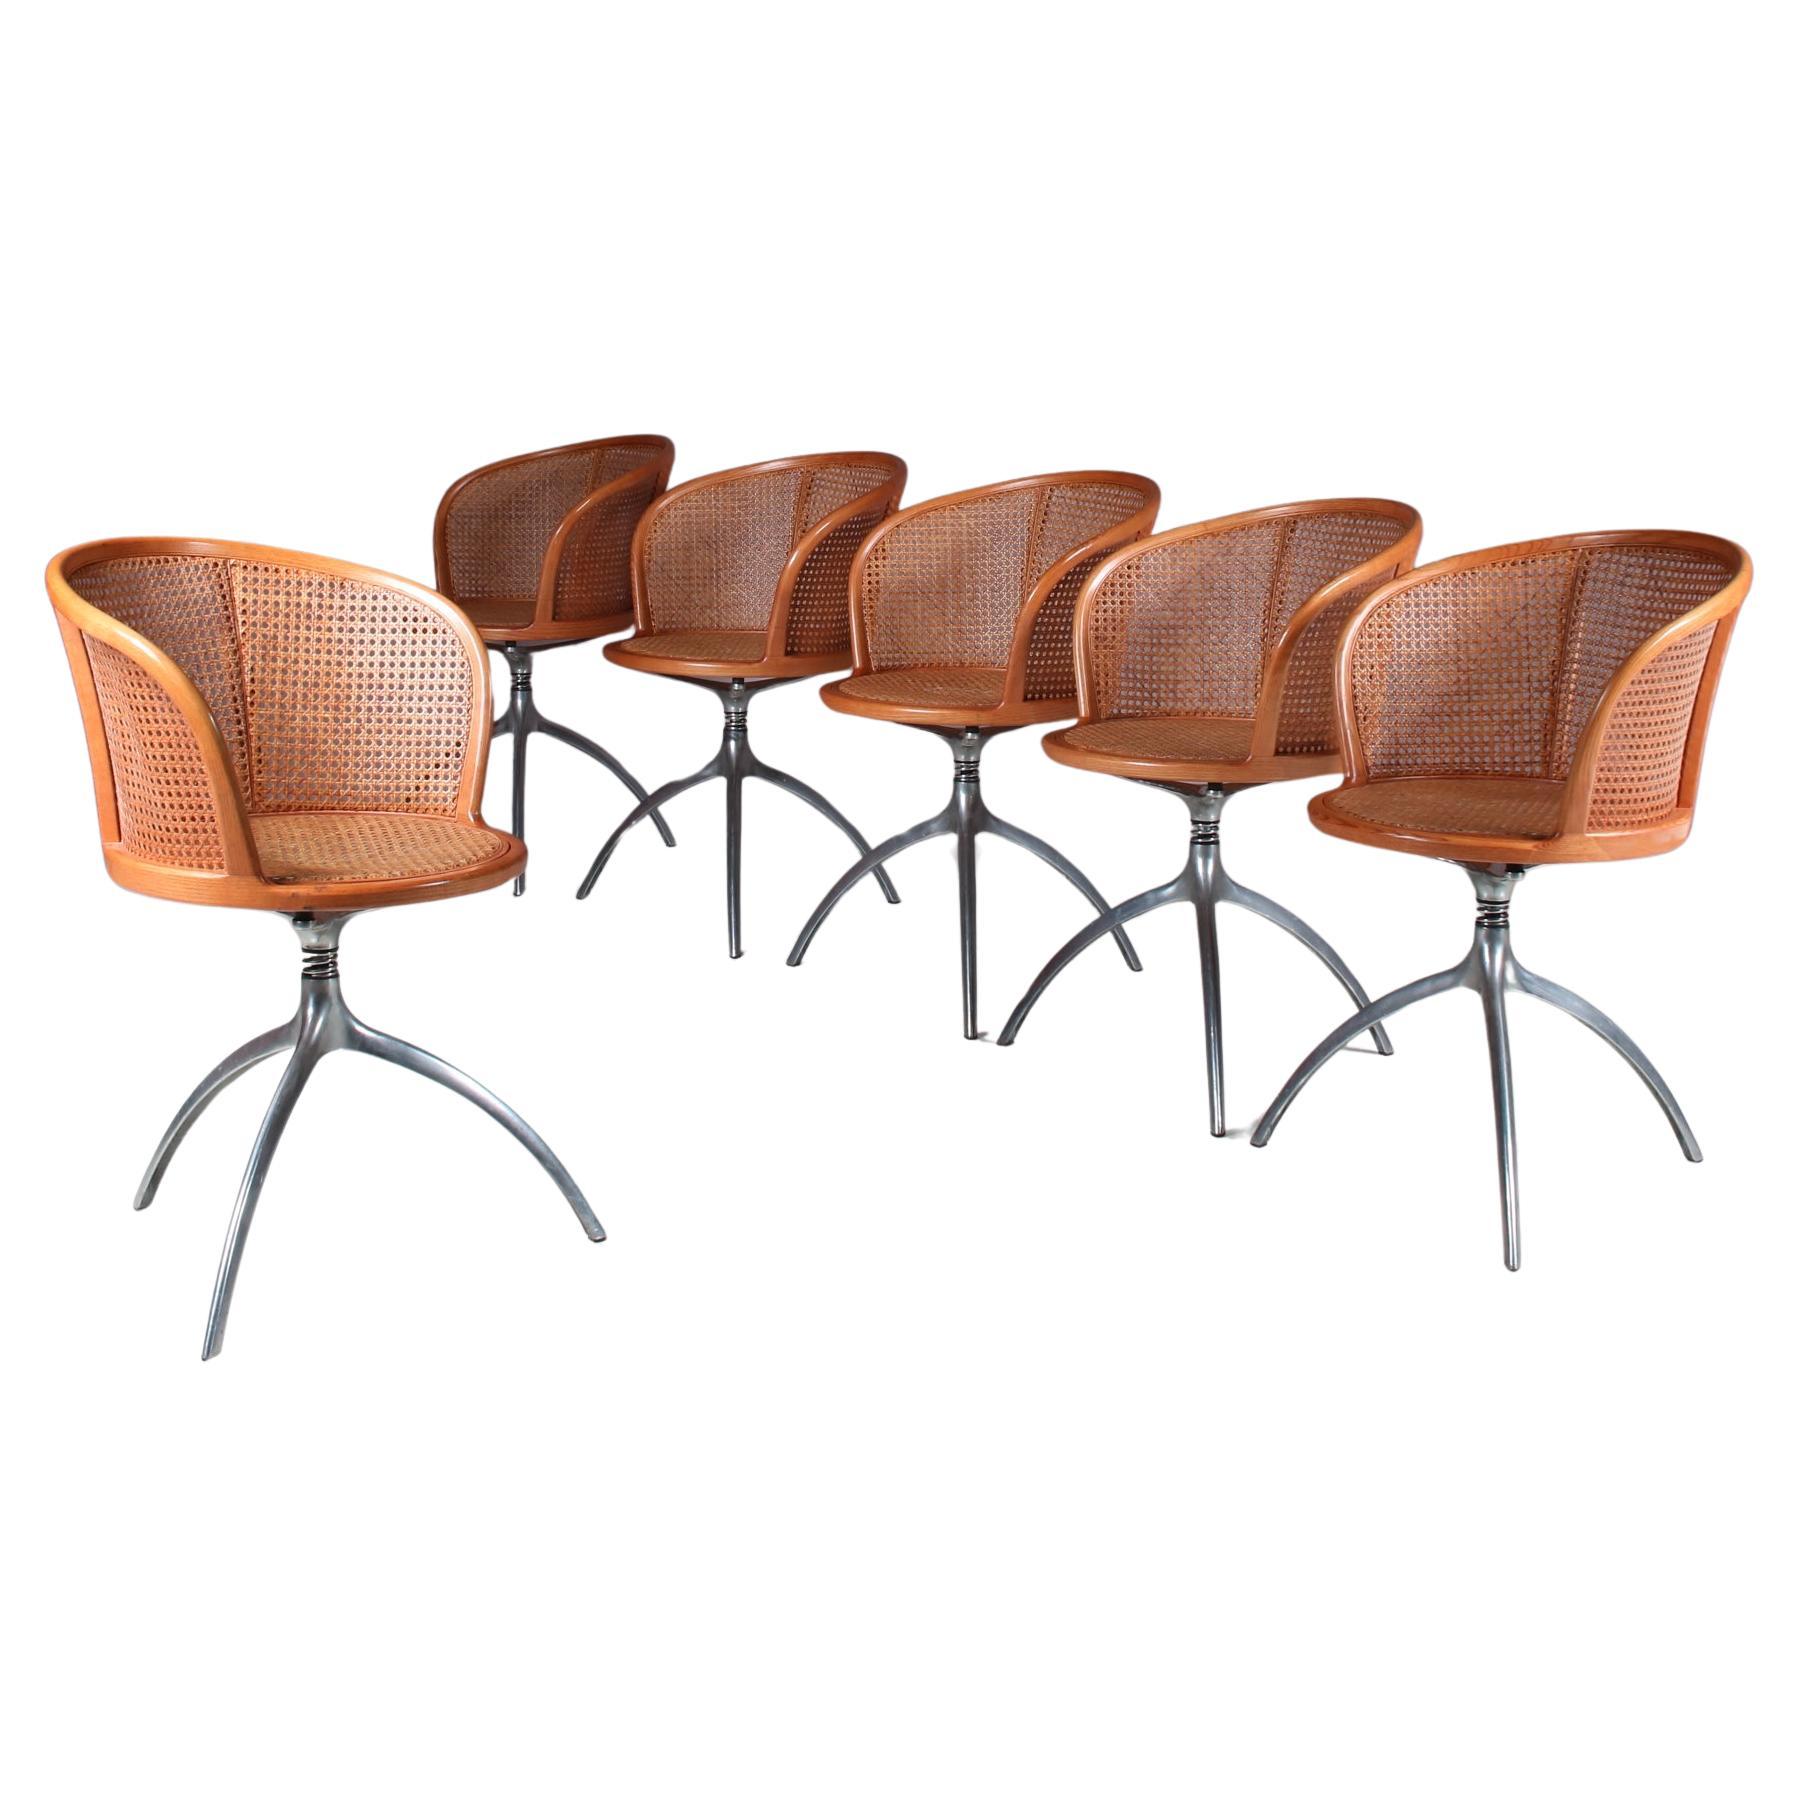 Set of 6 “Young Lady” Chairs by Paolo Rizzatto for Alias, Italy 1990 For Sale